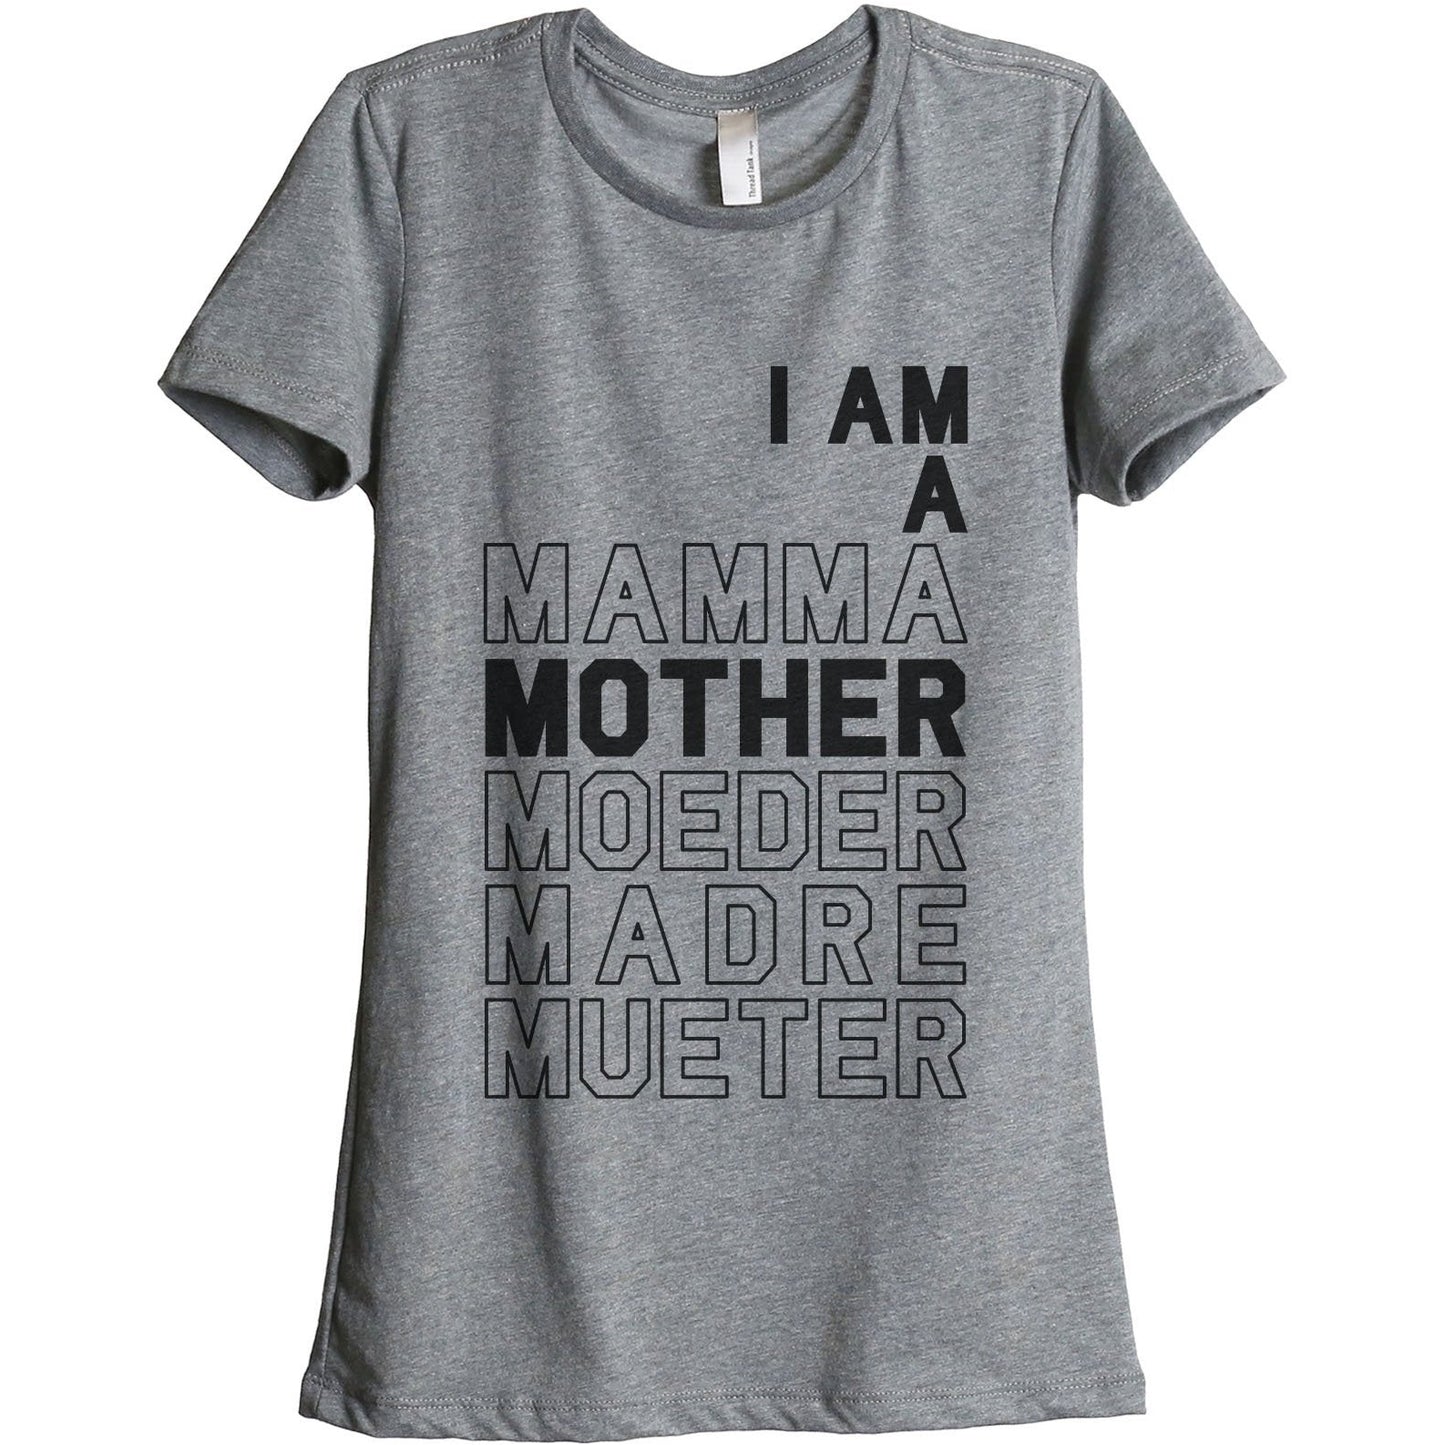 I Am A Mamma Mother Madre